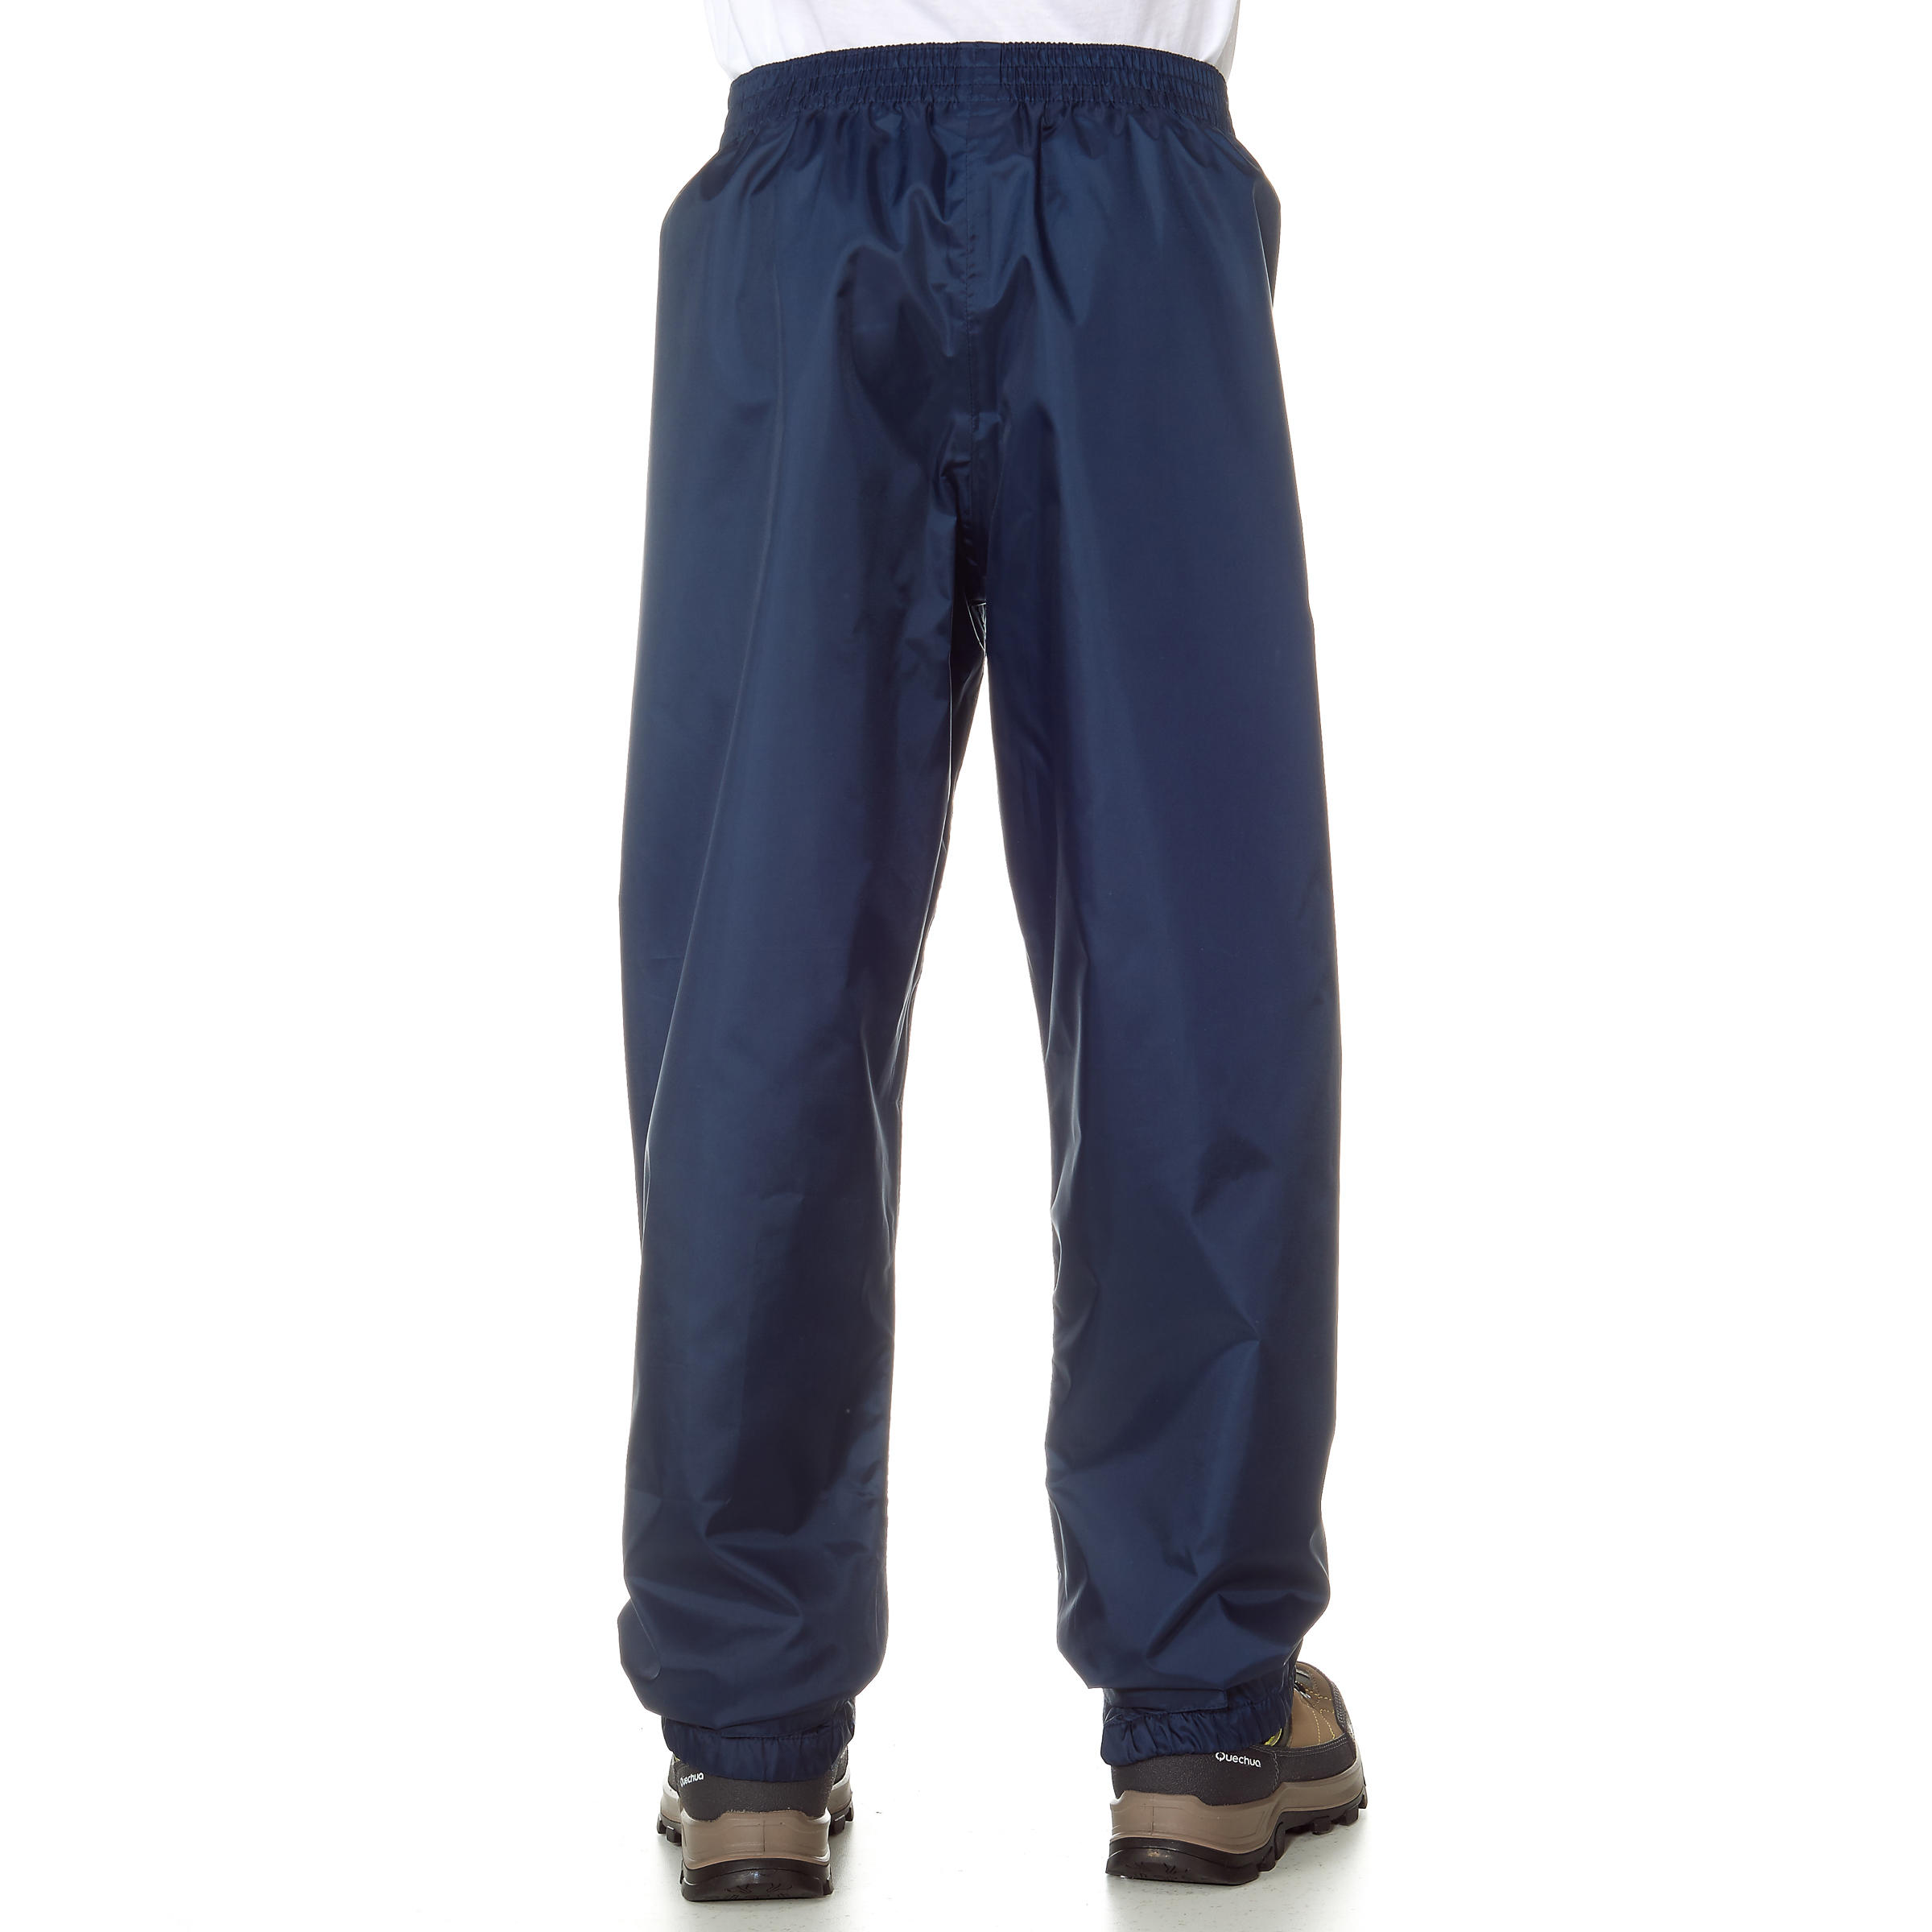 The best kids waterproof trousers  Lifestyle  Whats The Best